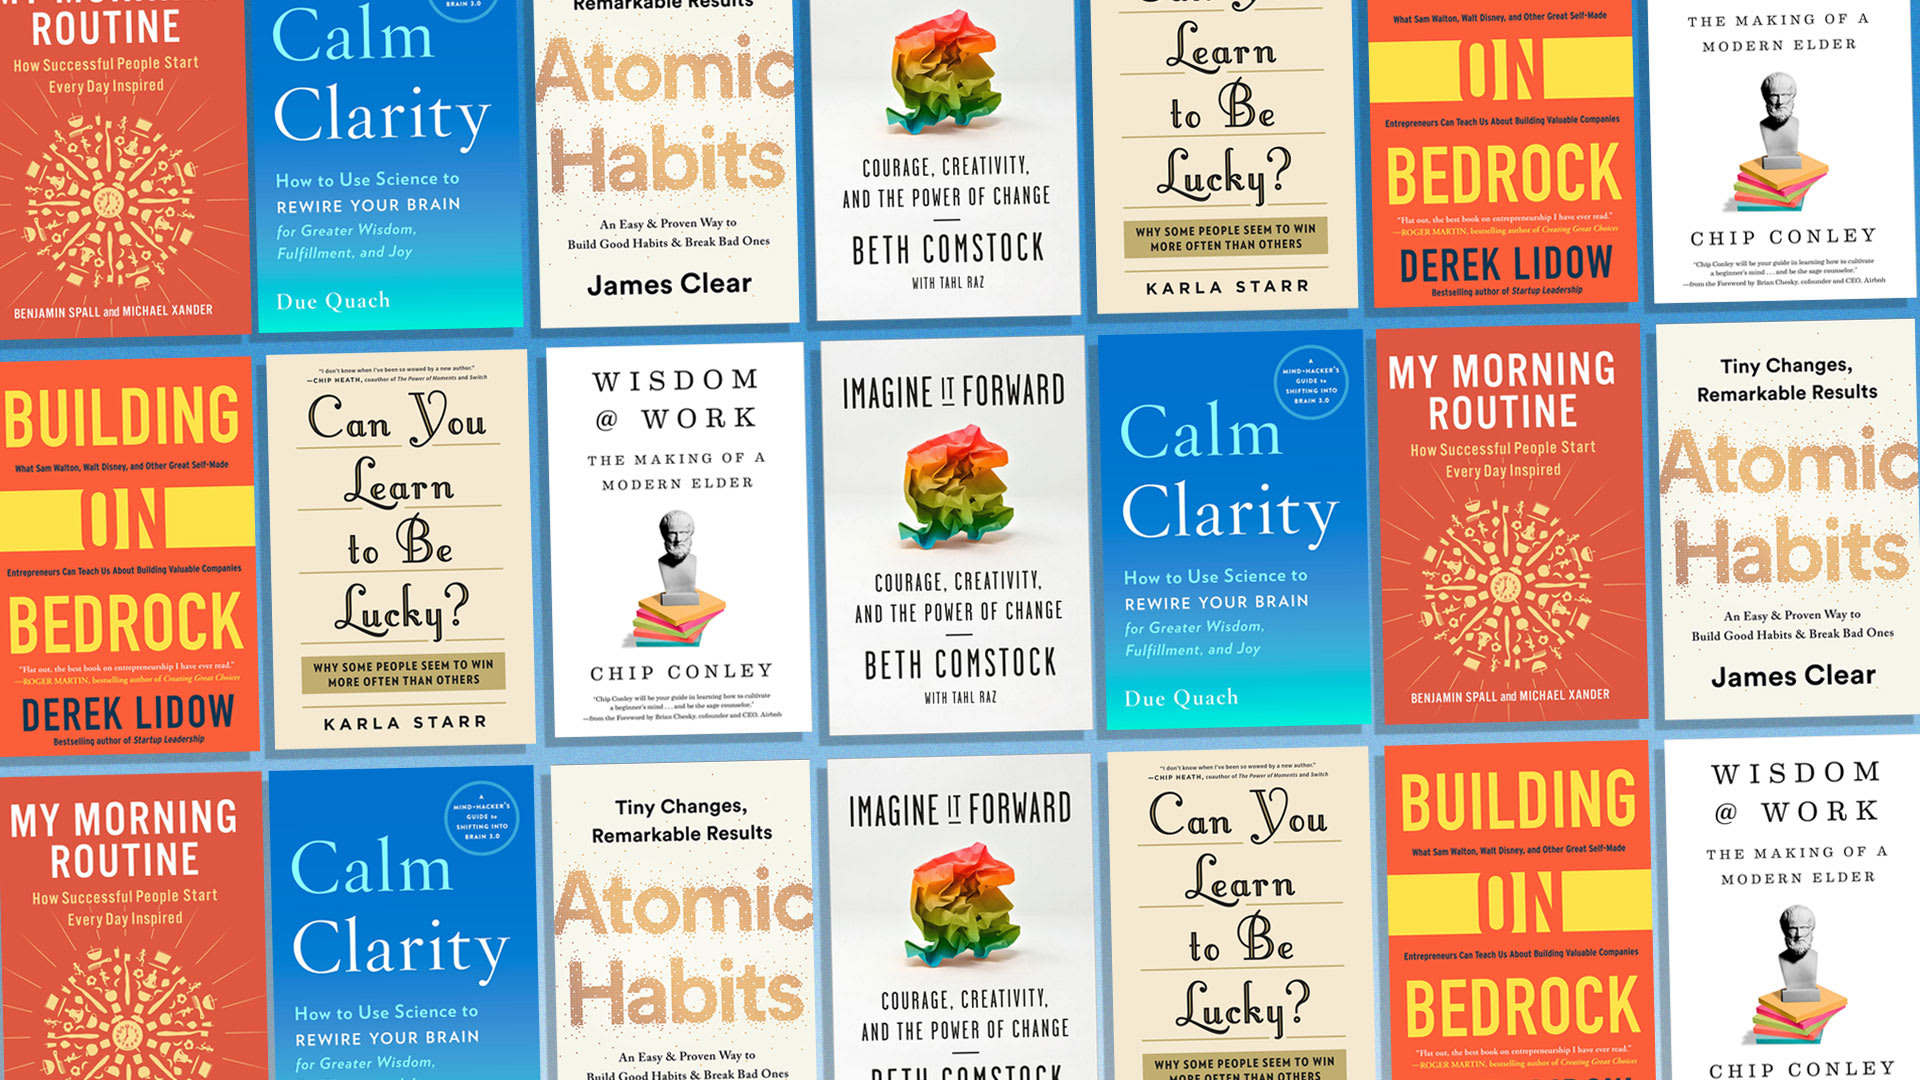 These are the 7 best business books of 2018